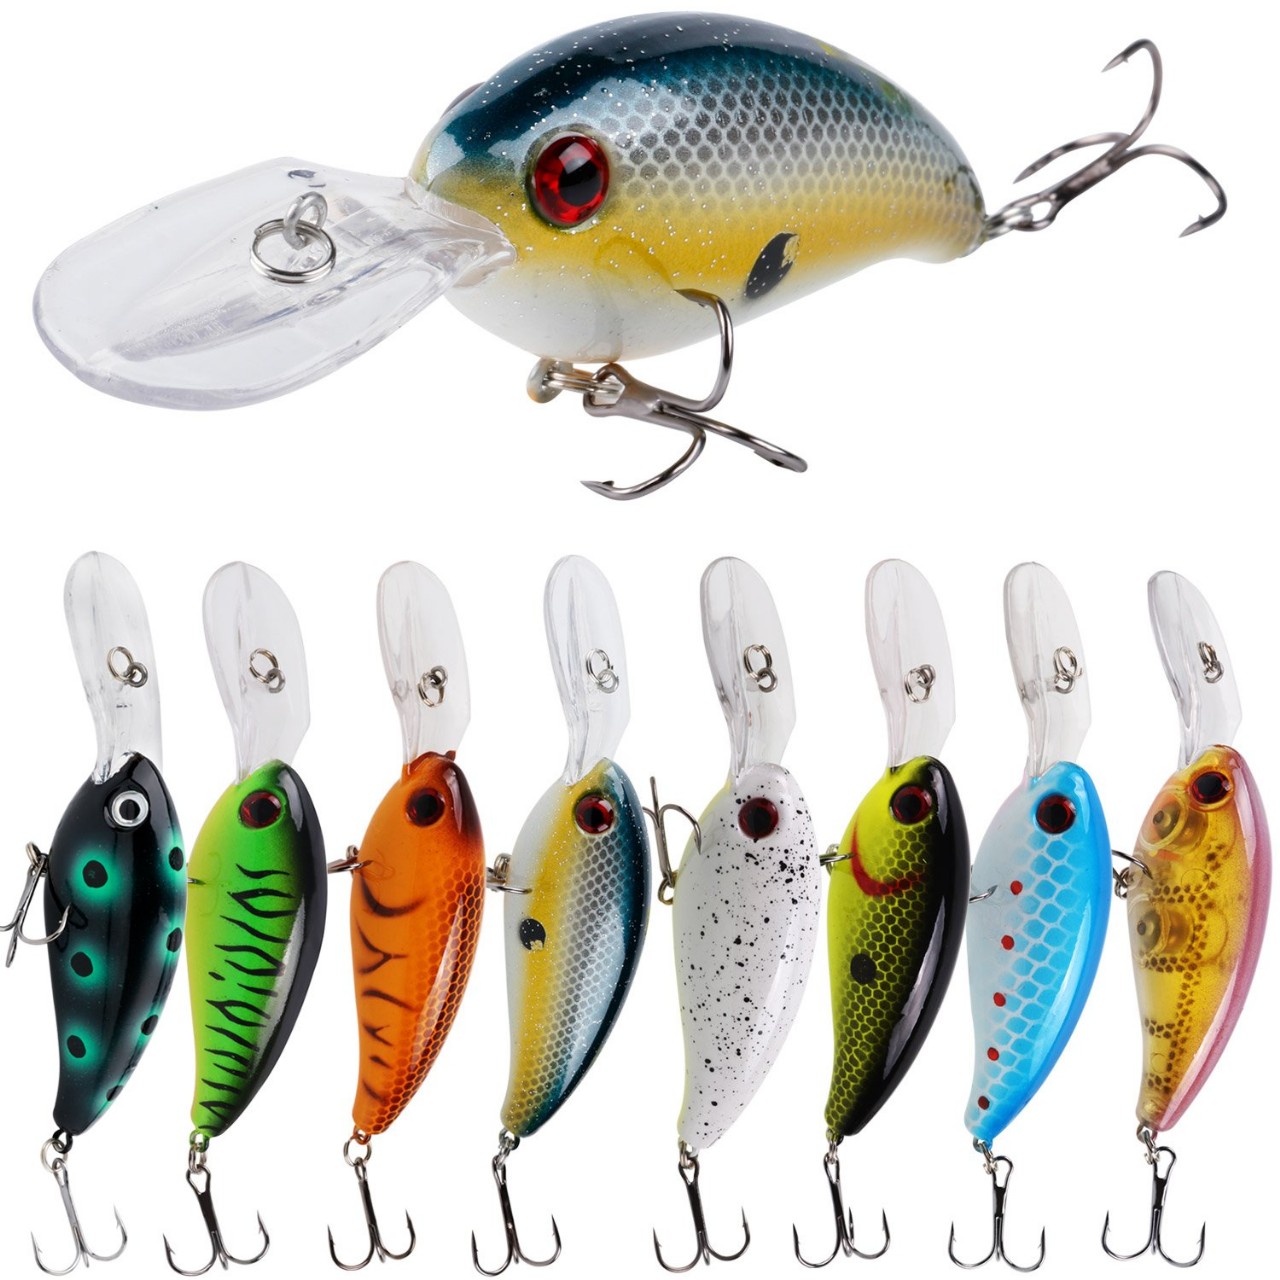 Fishing Lures Shallow Deep Diving Swimbait Crankbait Fishing Wobble Multi Jointed Hard Baits for Bas